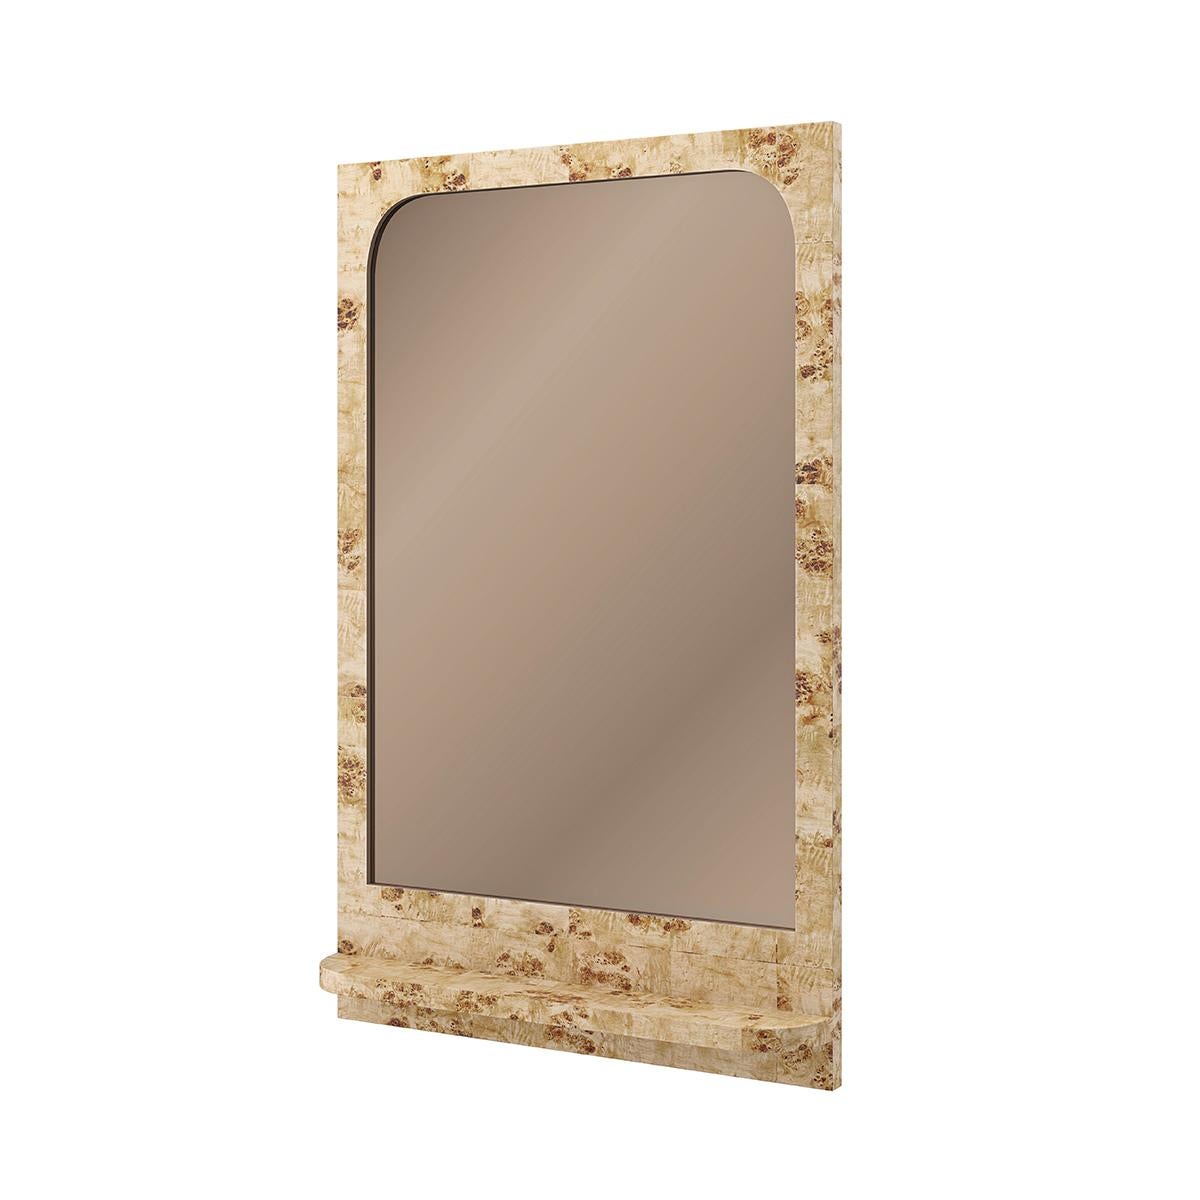 Framed in exotic mappa burl veneers. Tinted bronze casts a warm glow, complemented by a natural interplay of light and dark tones.

Features a small shelf for keeping trinkets and treasures. A standout and unusual modern mirror.

Dimensions: 30